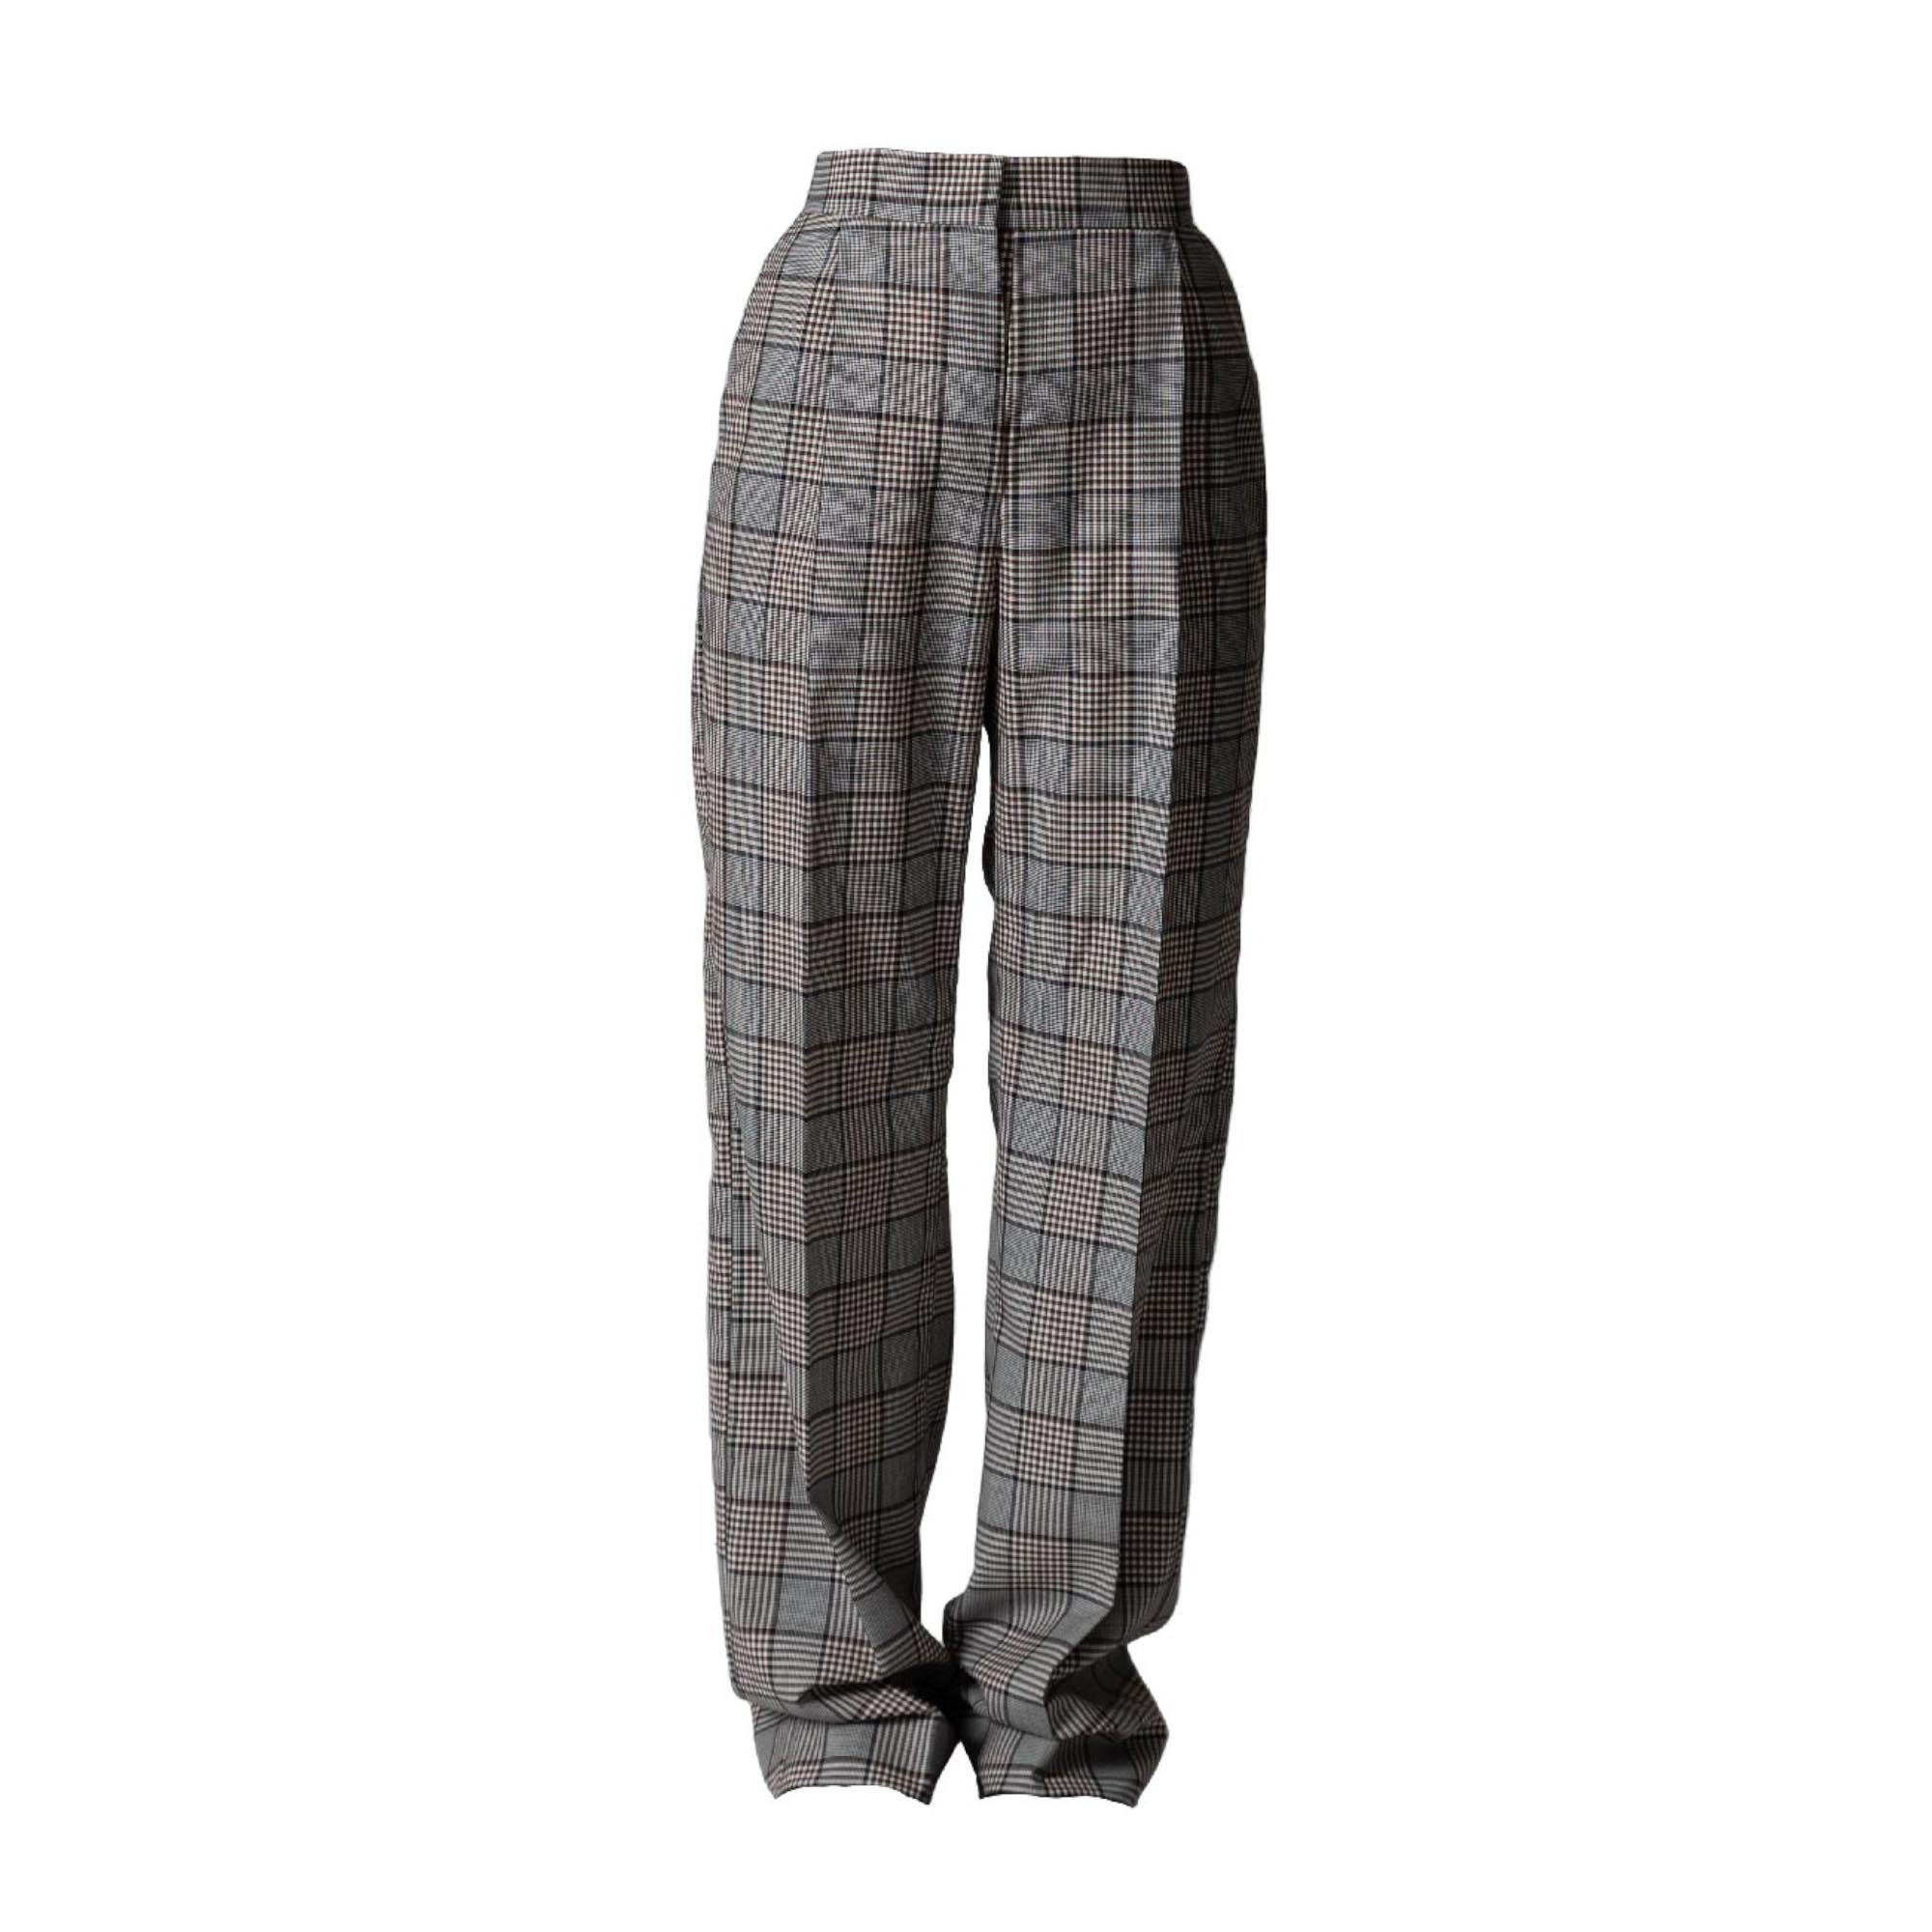 Suit Pants Straight / library check